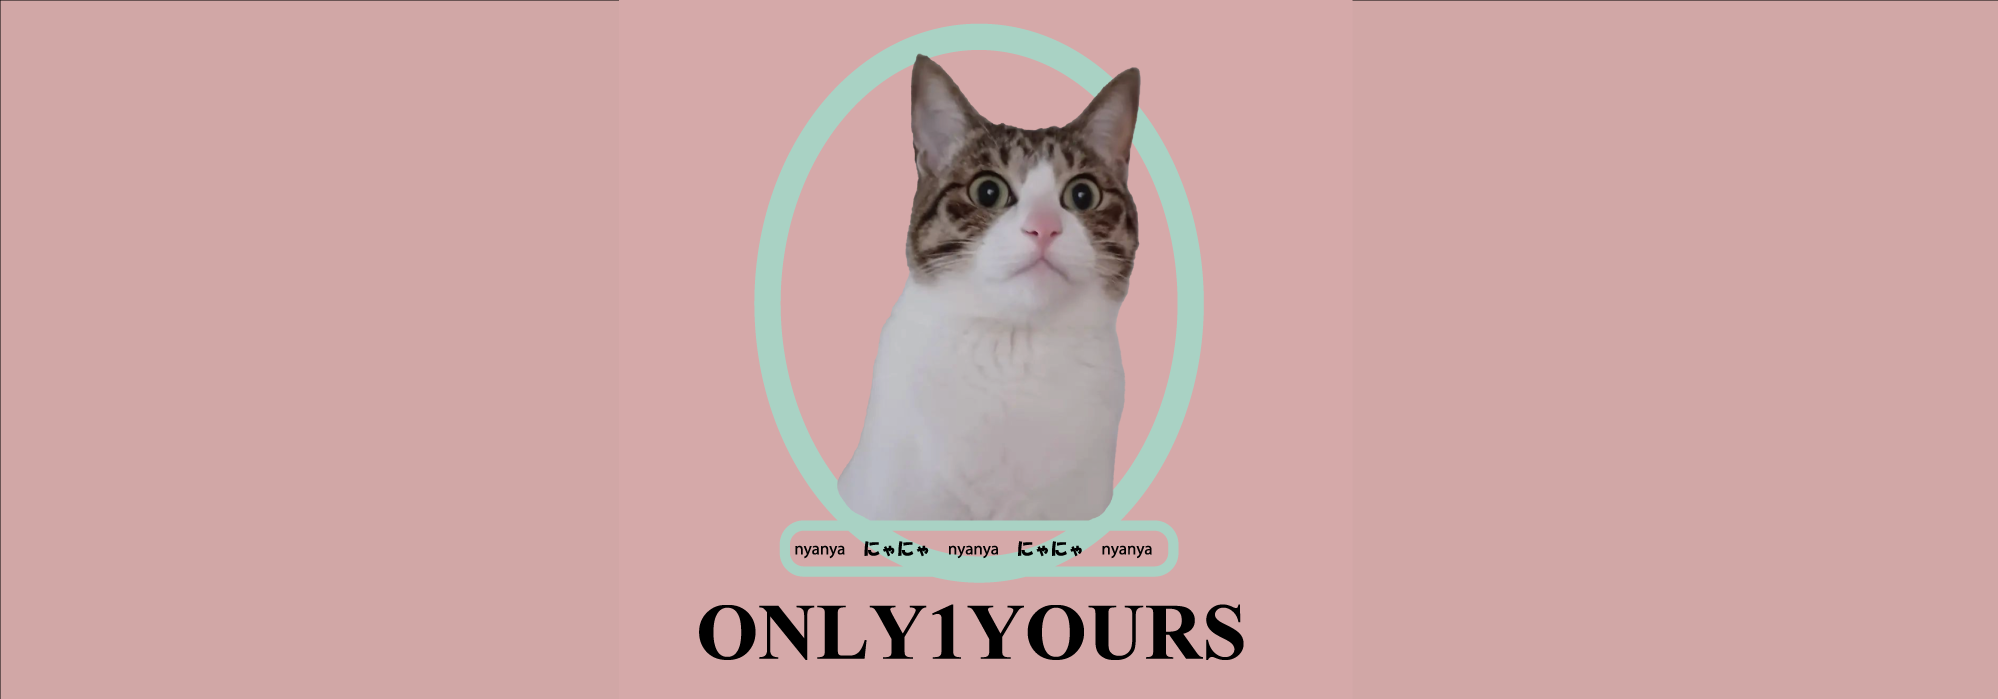 ONLY1YOURS公式サイト